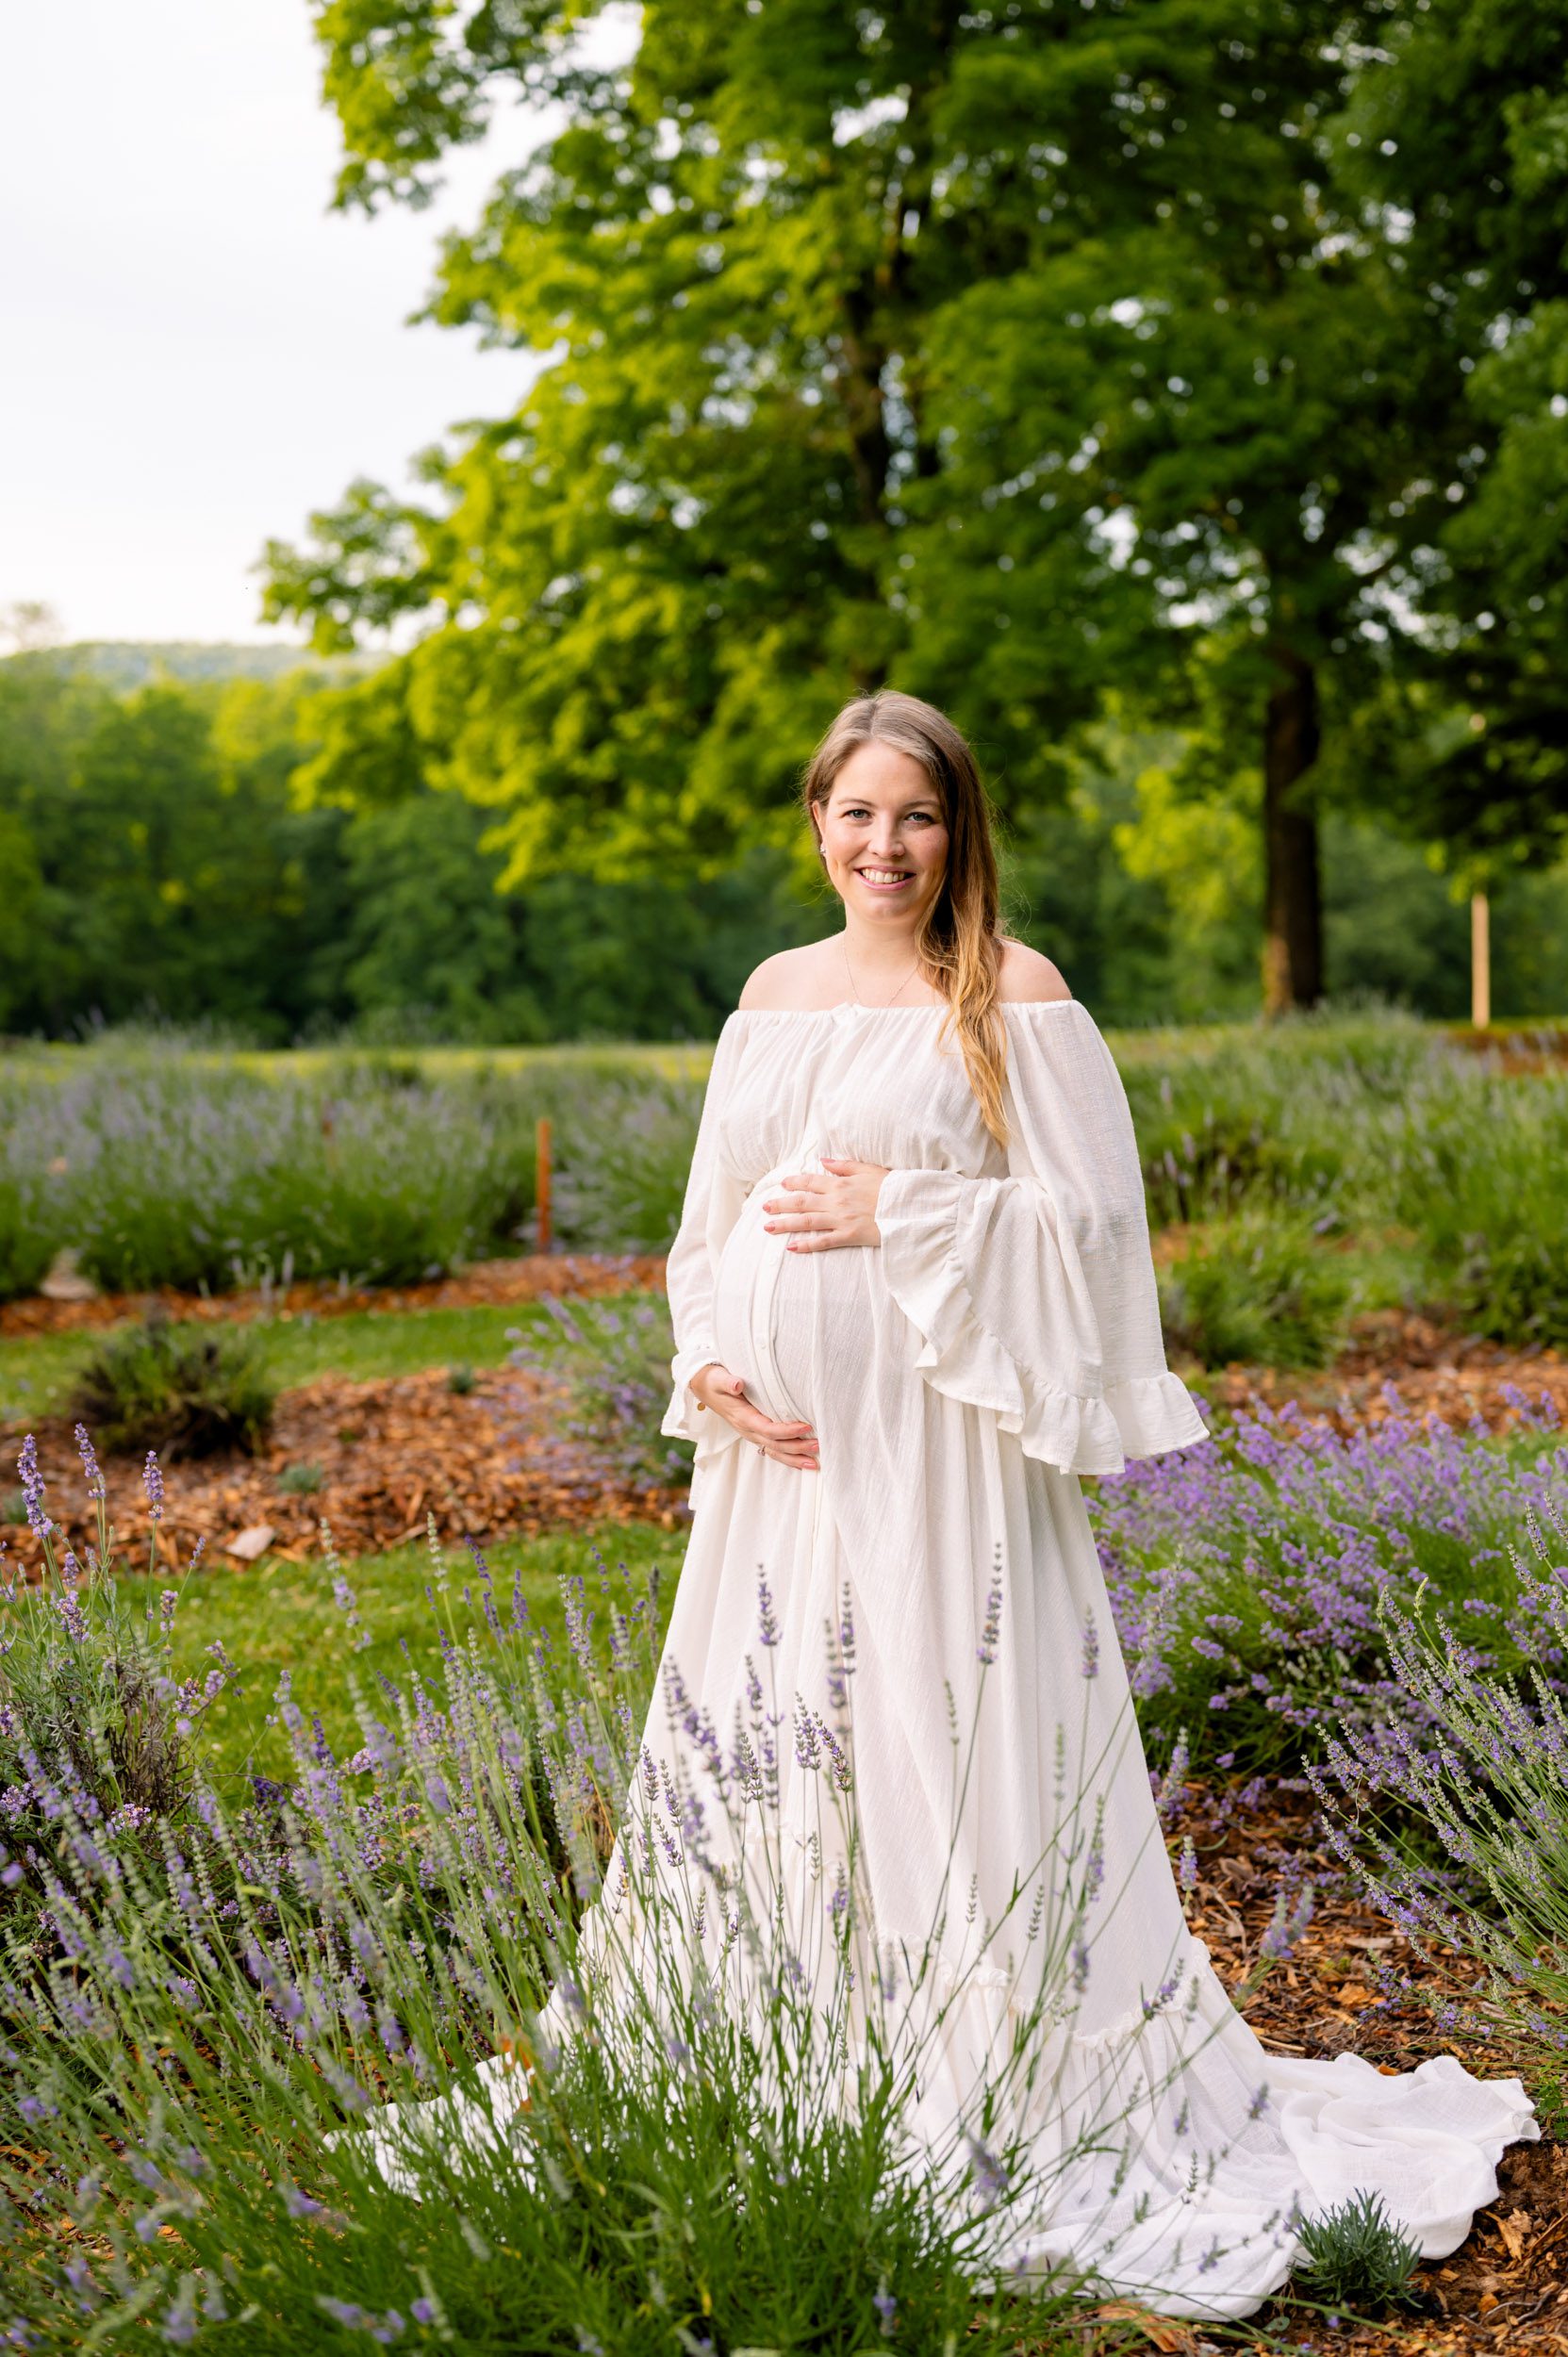 an expecting mother standing wearing a long, flowy white dress and standing in a lavender field and cradling her belly as she looks at the camera and smiles during a maternity photoshoot